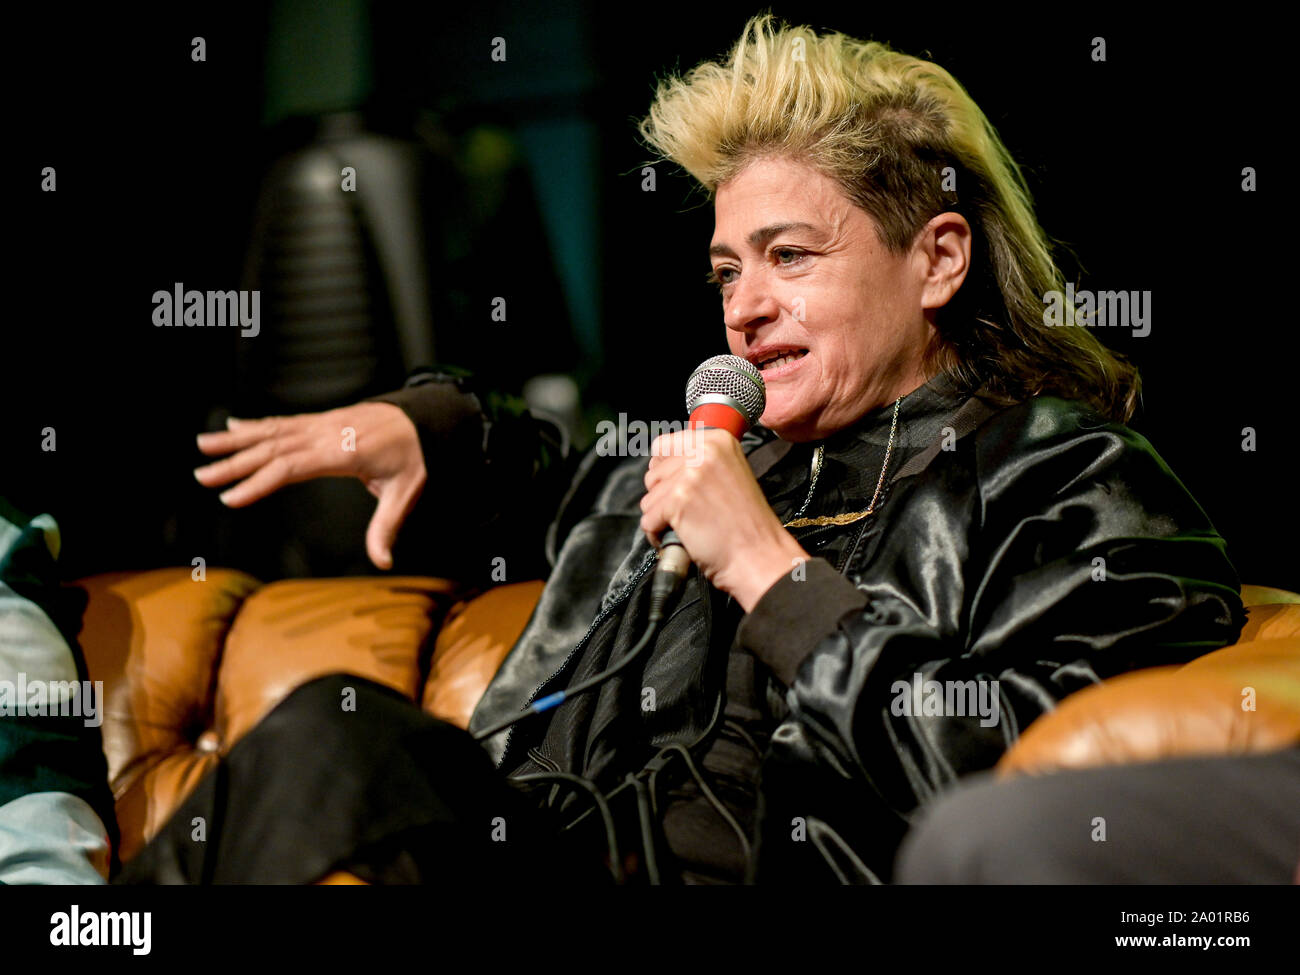 Hamburg, Germany. 19th Sep, 2019. Peaches, musician, speaks at the